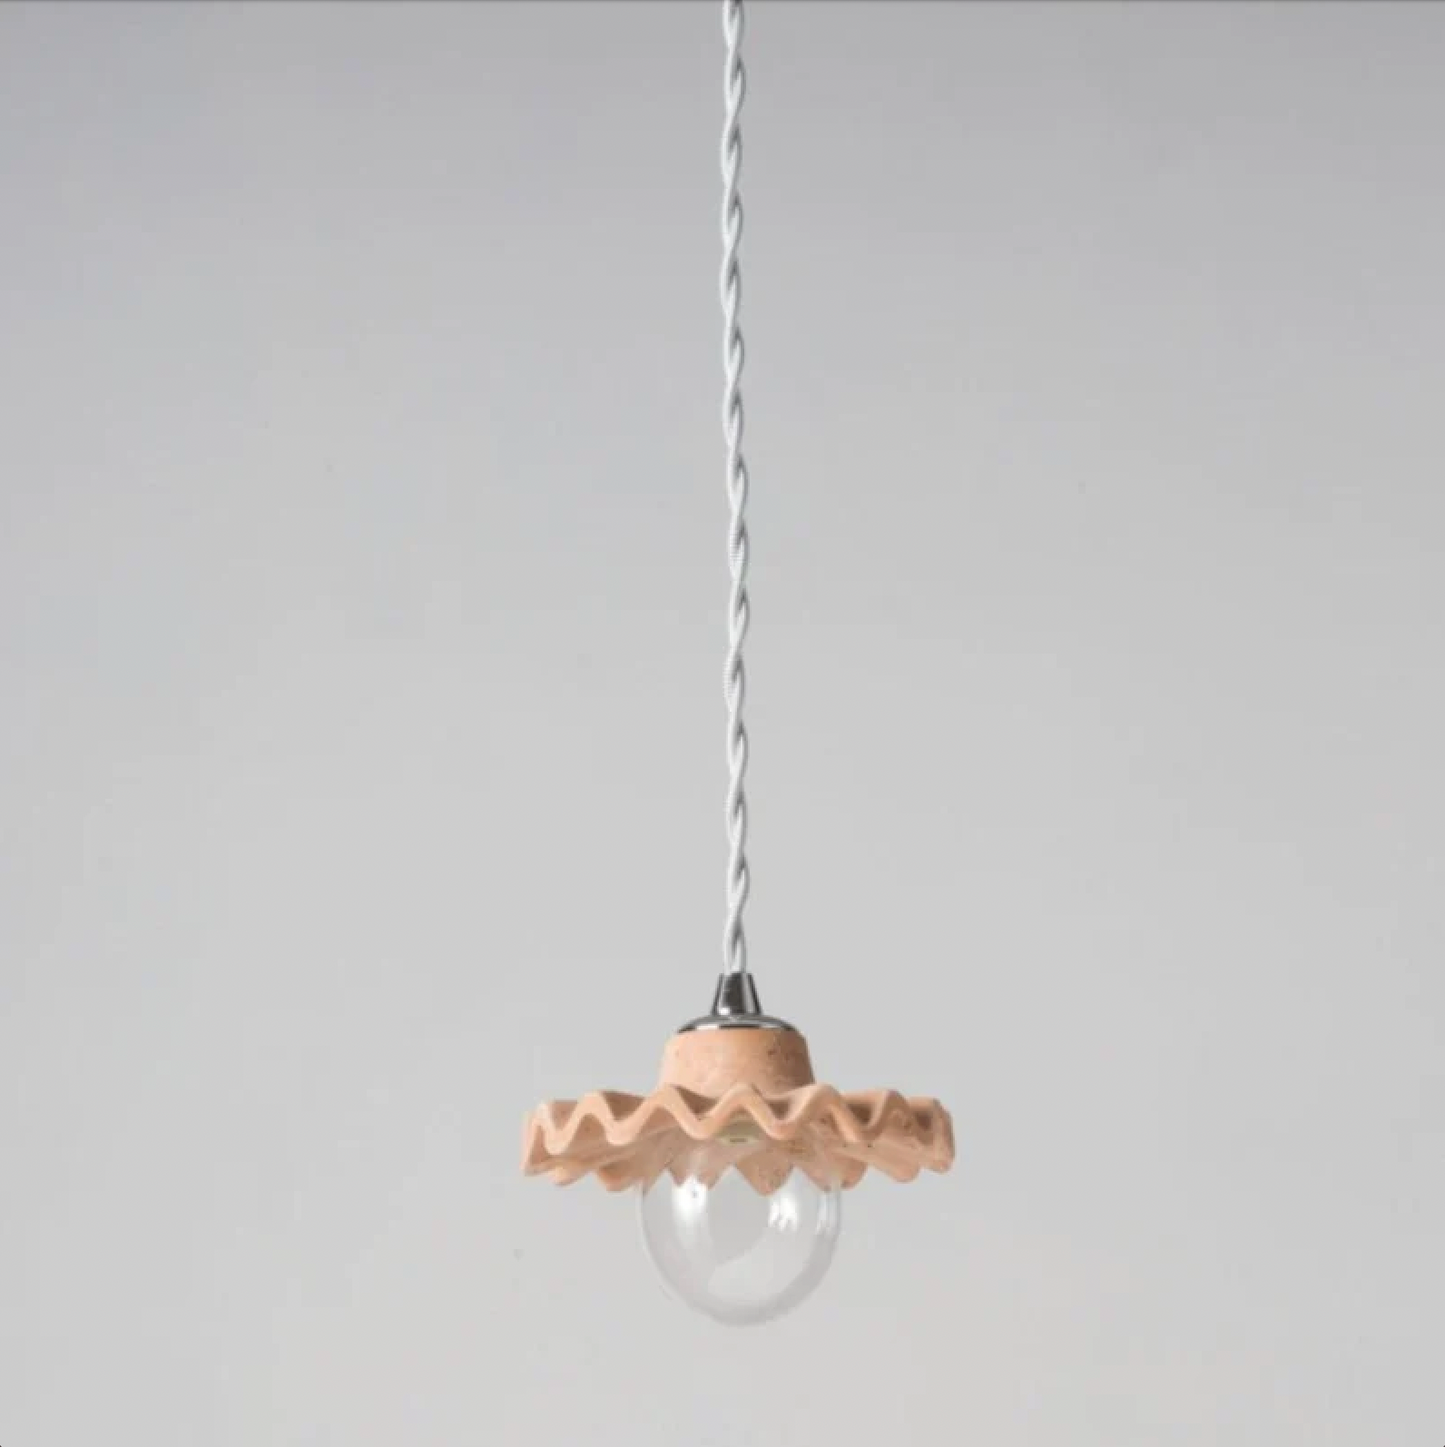 Apuane 1122S Pendant Light by Toscot